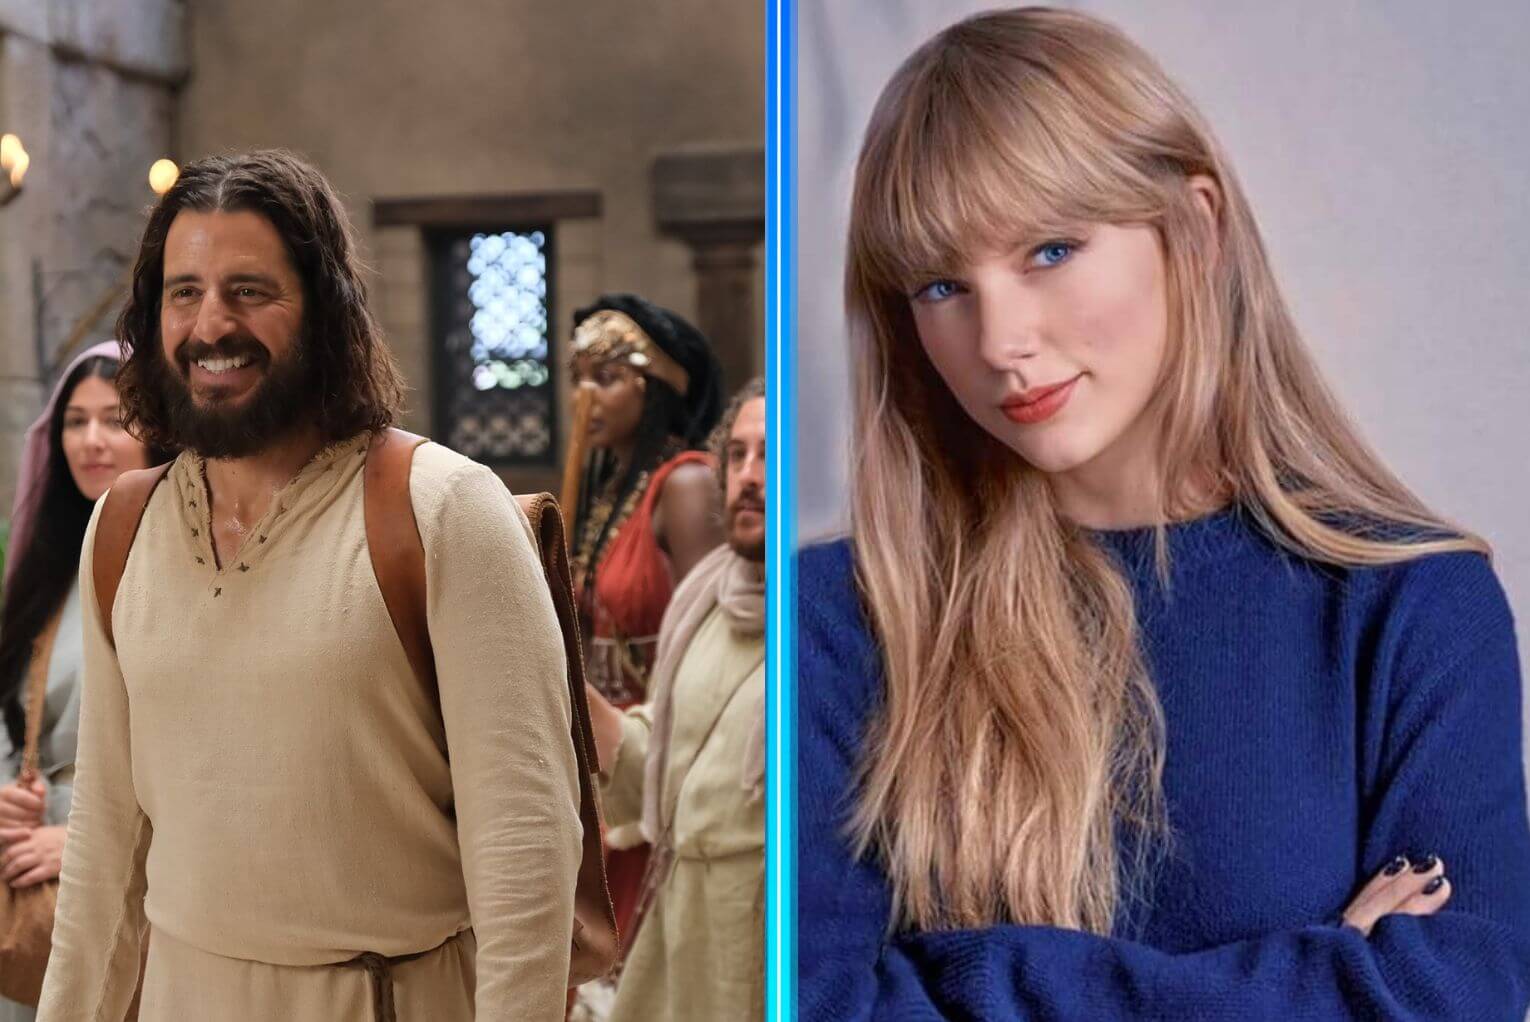 What Do Taylor Swift and ‘The Chosen’ Have in Common?